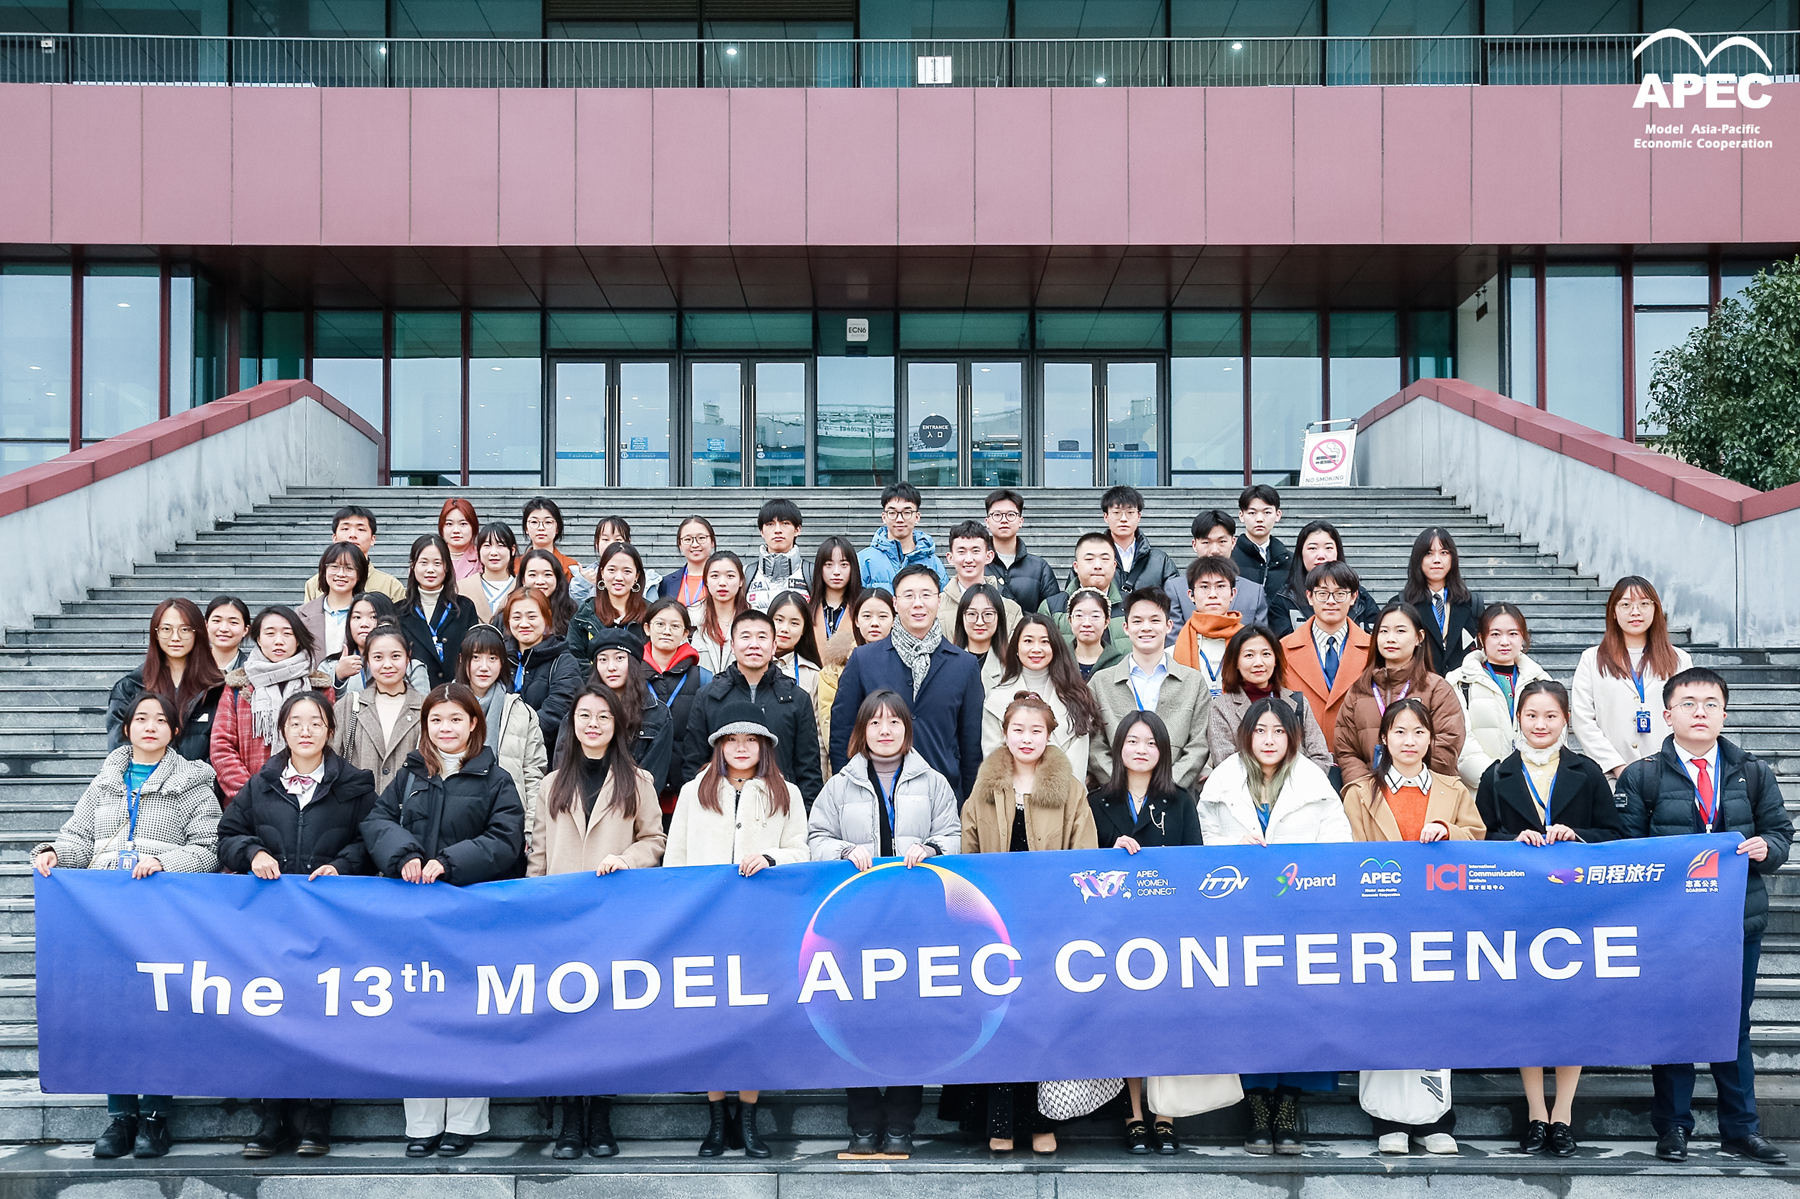 Students discuss sustainability at Model APEC Conference